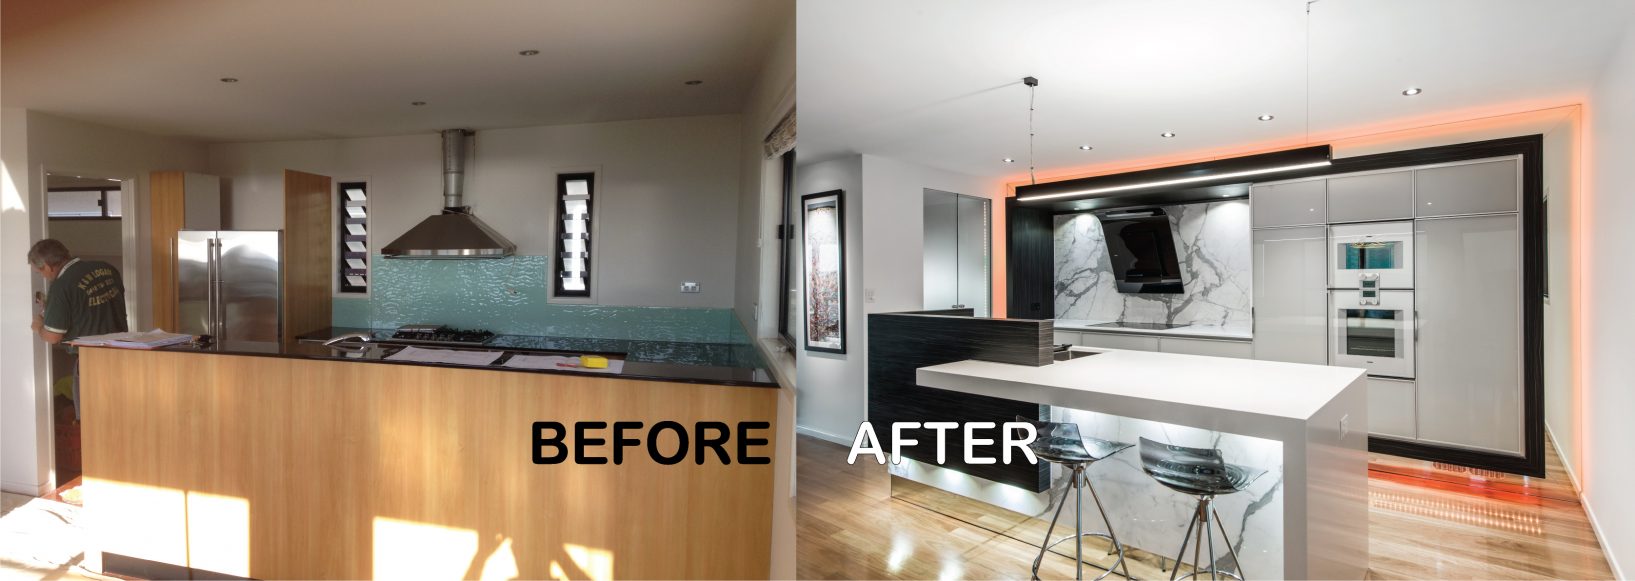 Kitchens-Brisbane-Before-and-After-2